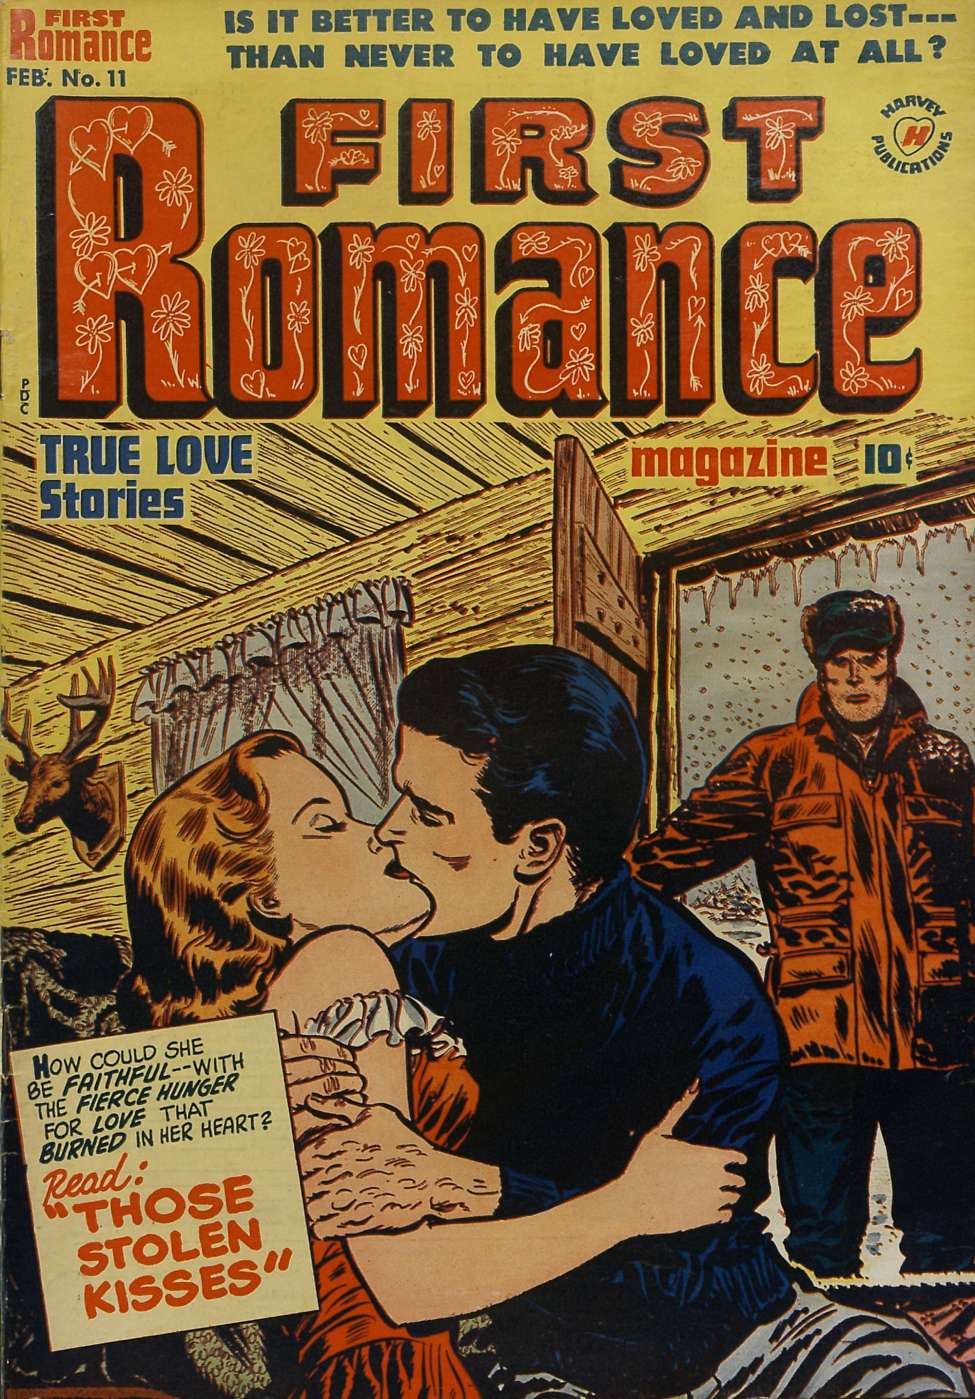 Comic Book Cover For First Romance Magazine 11 - Version 2